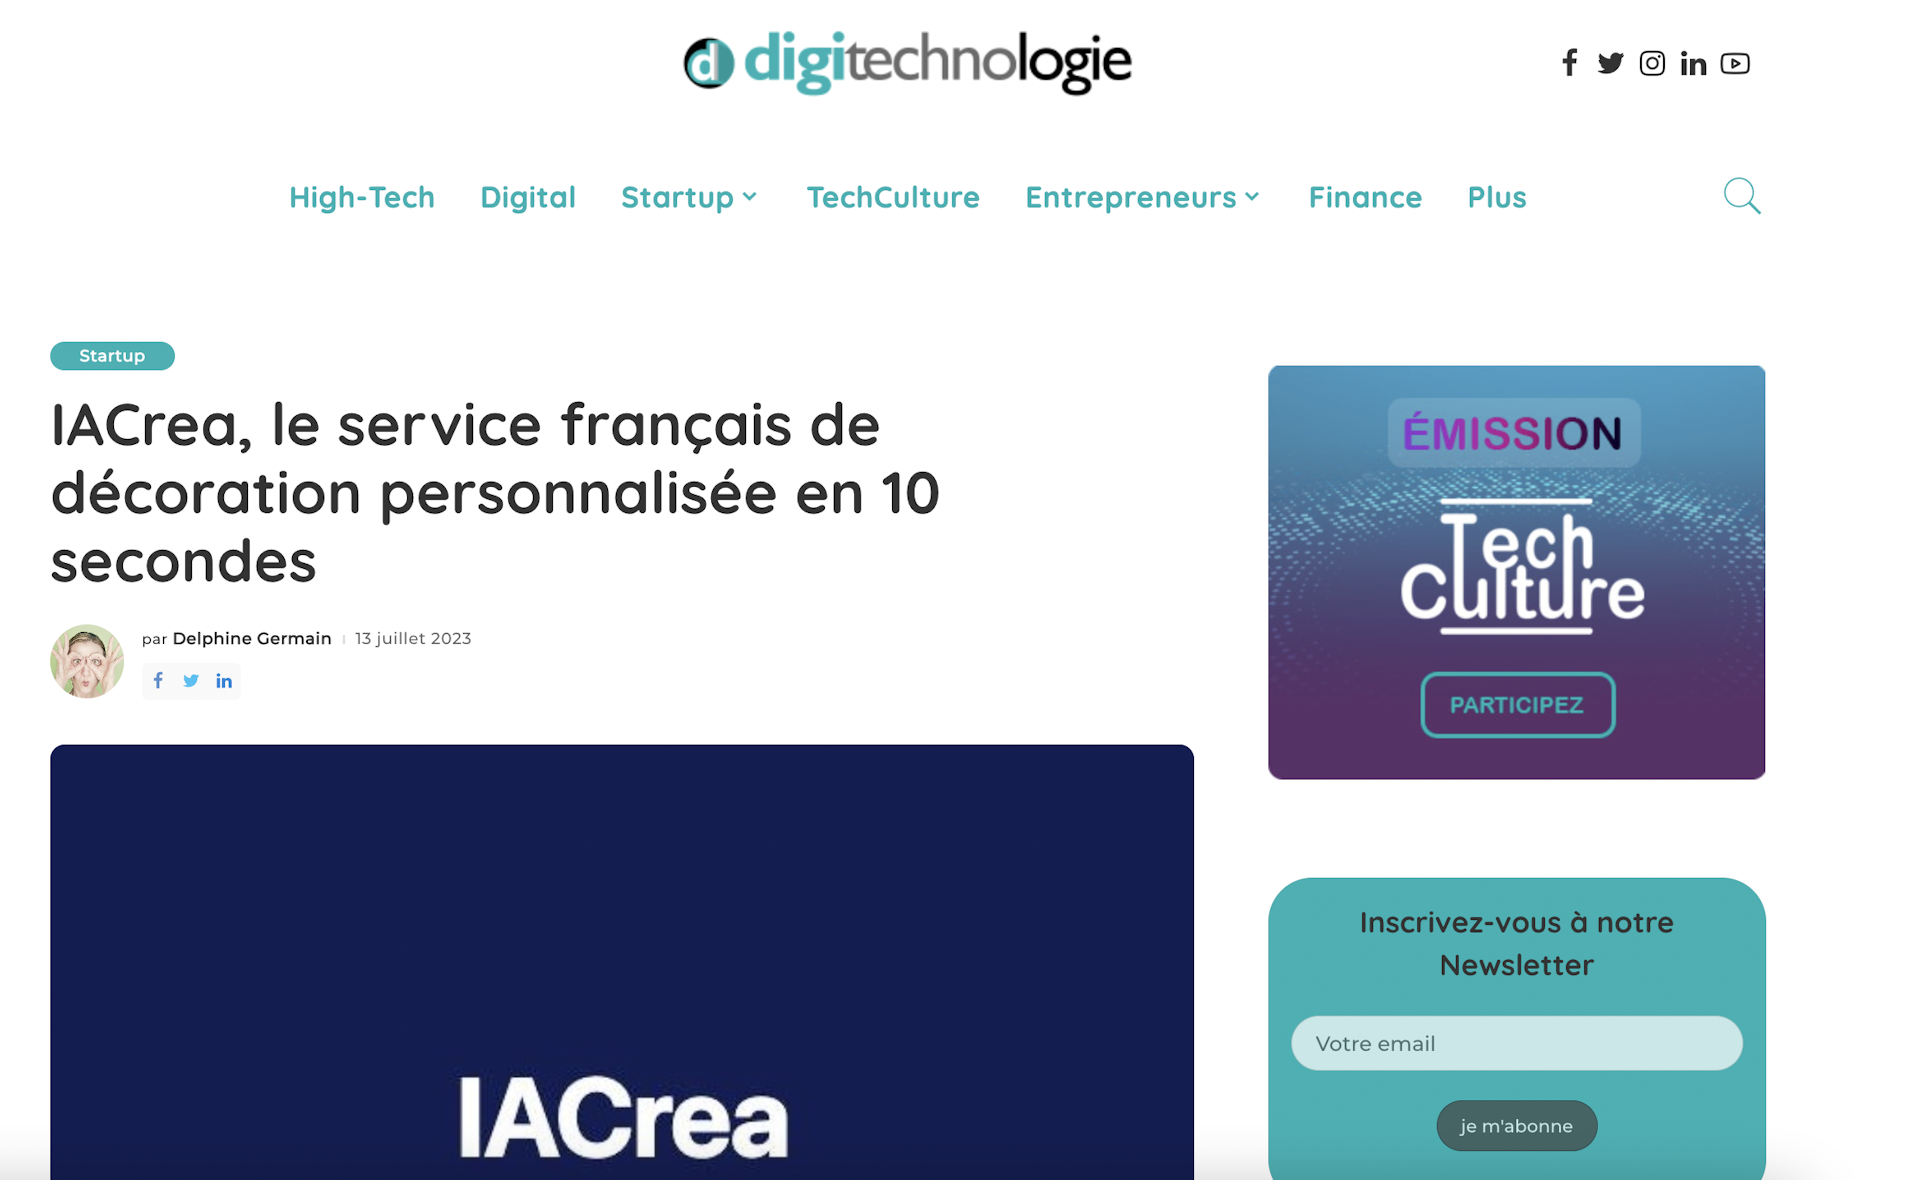 Digitechnologie describes IACrea as the French service for personalized decoration in 10 seconds